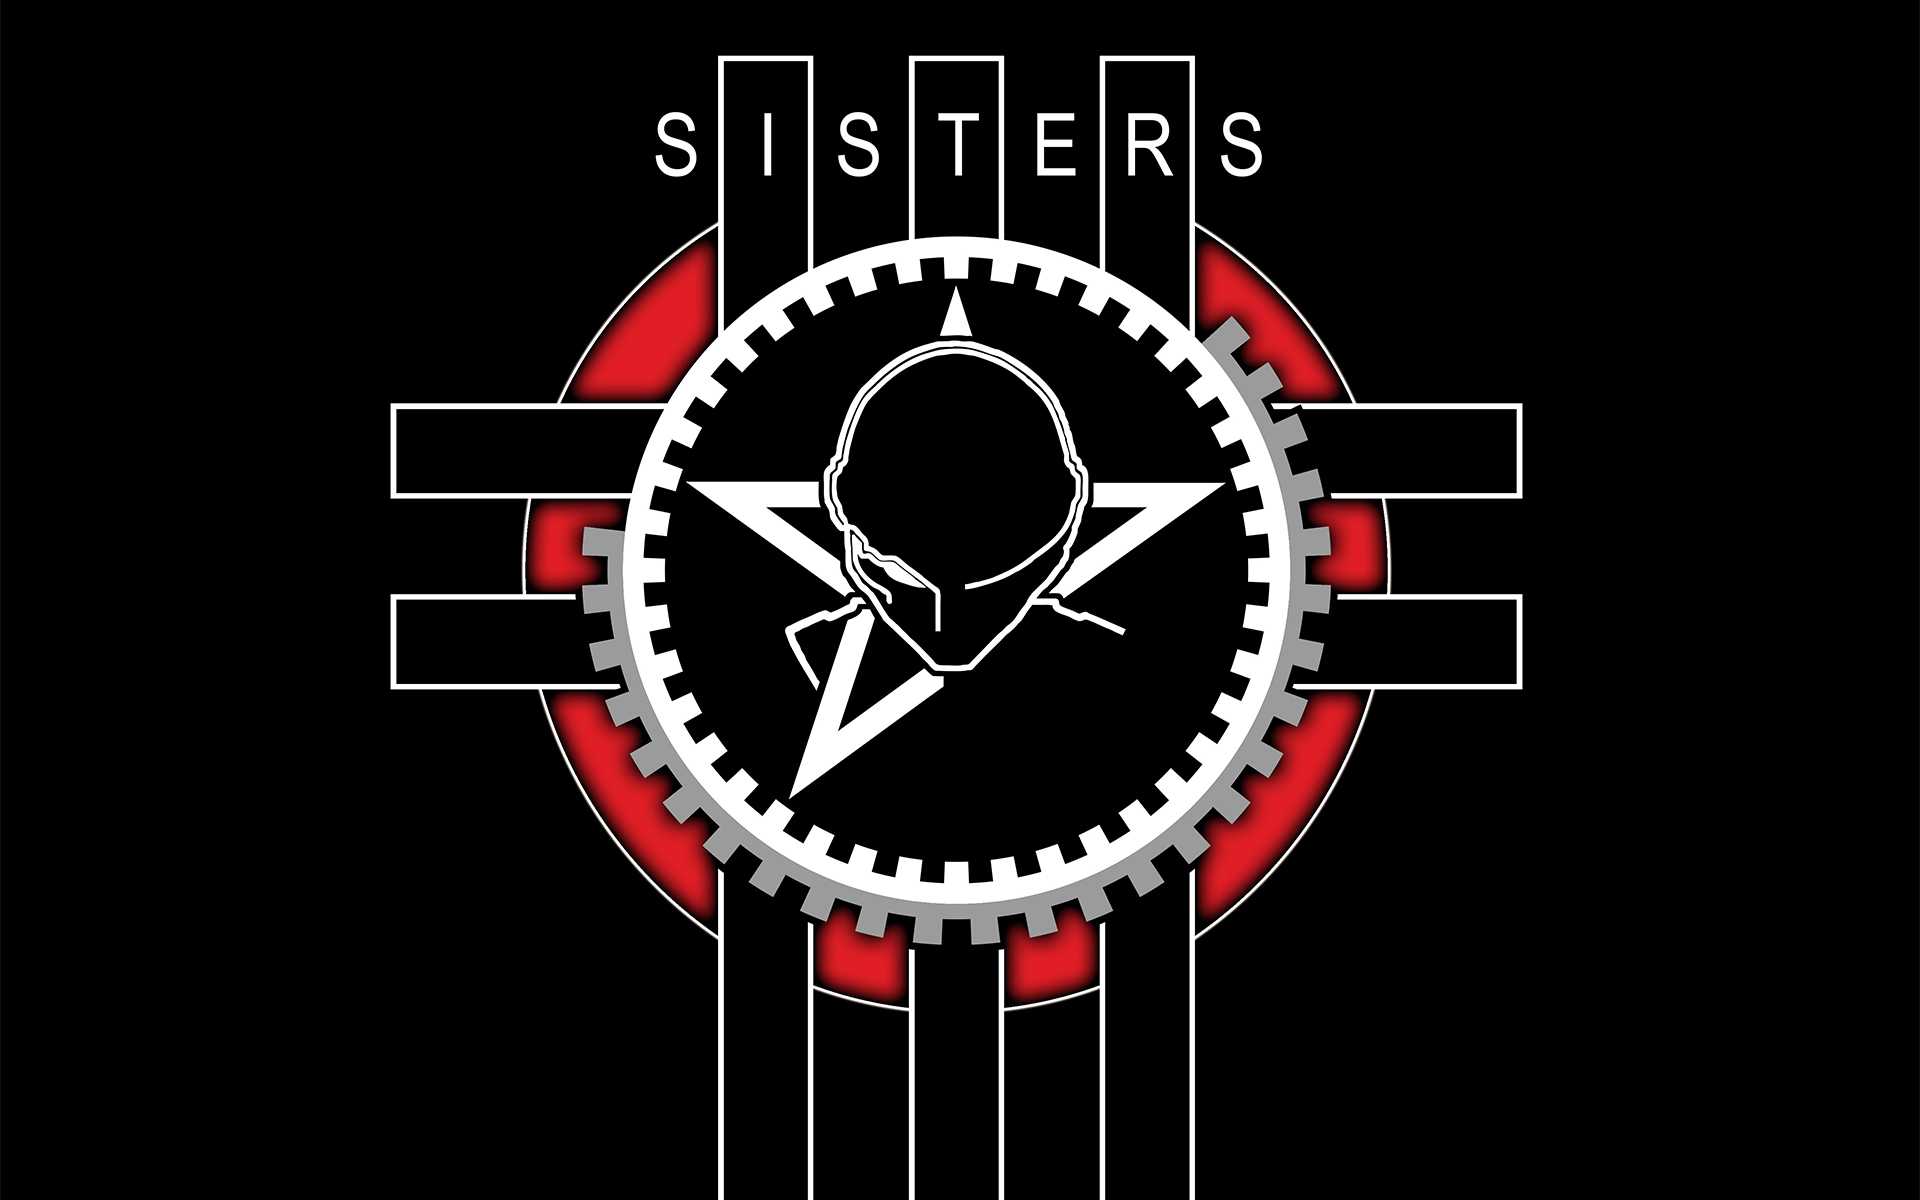 The sisters of mercy